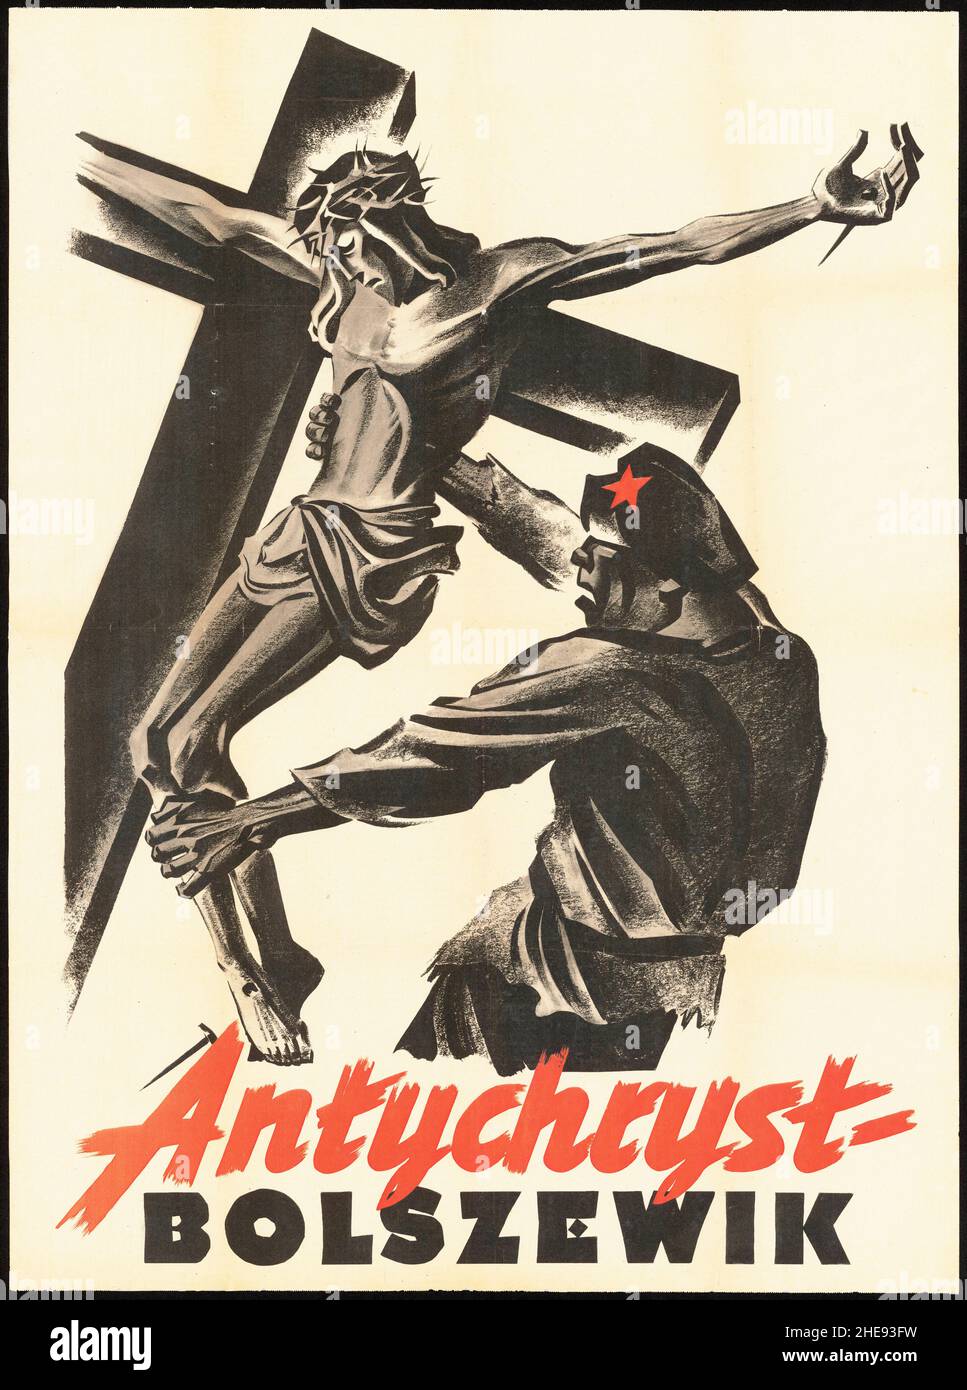 A Polish anti-Bolshevik propaganda poster showing a Red Army soldier pulling down a statue of christ on the cross with the caption 'Bolshevik Antichrist' Stock Photo